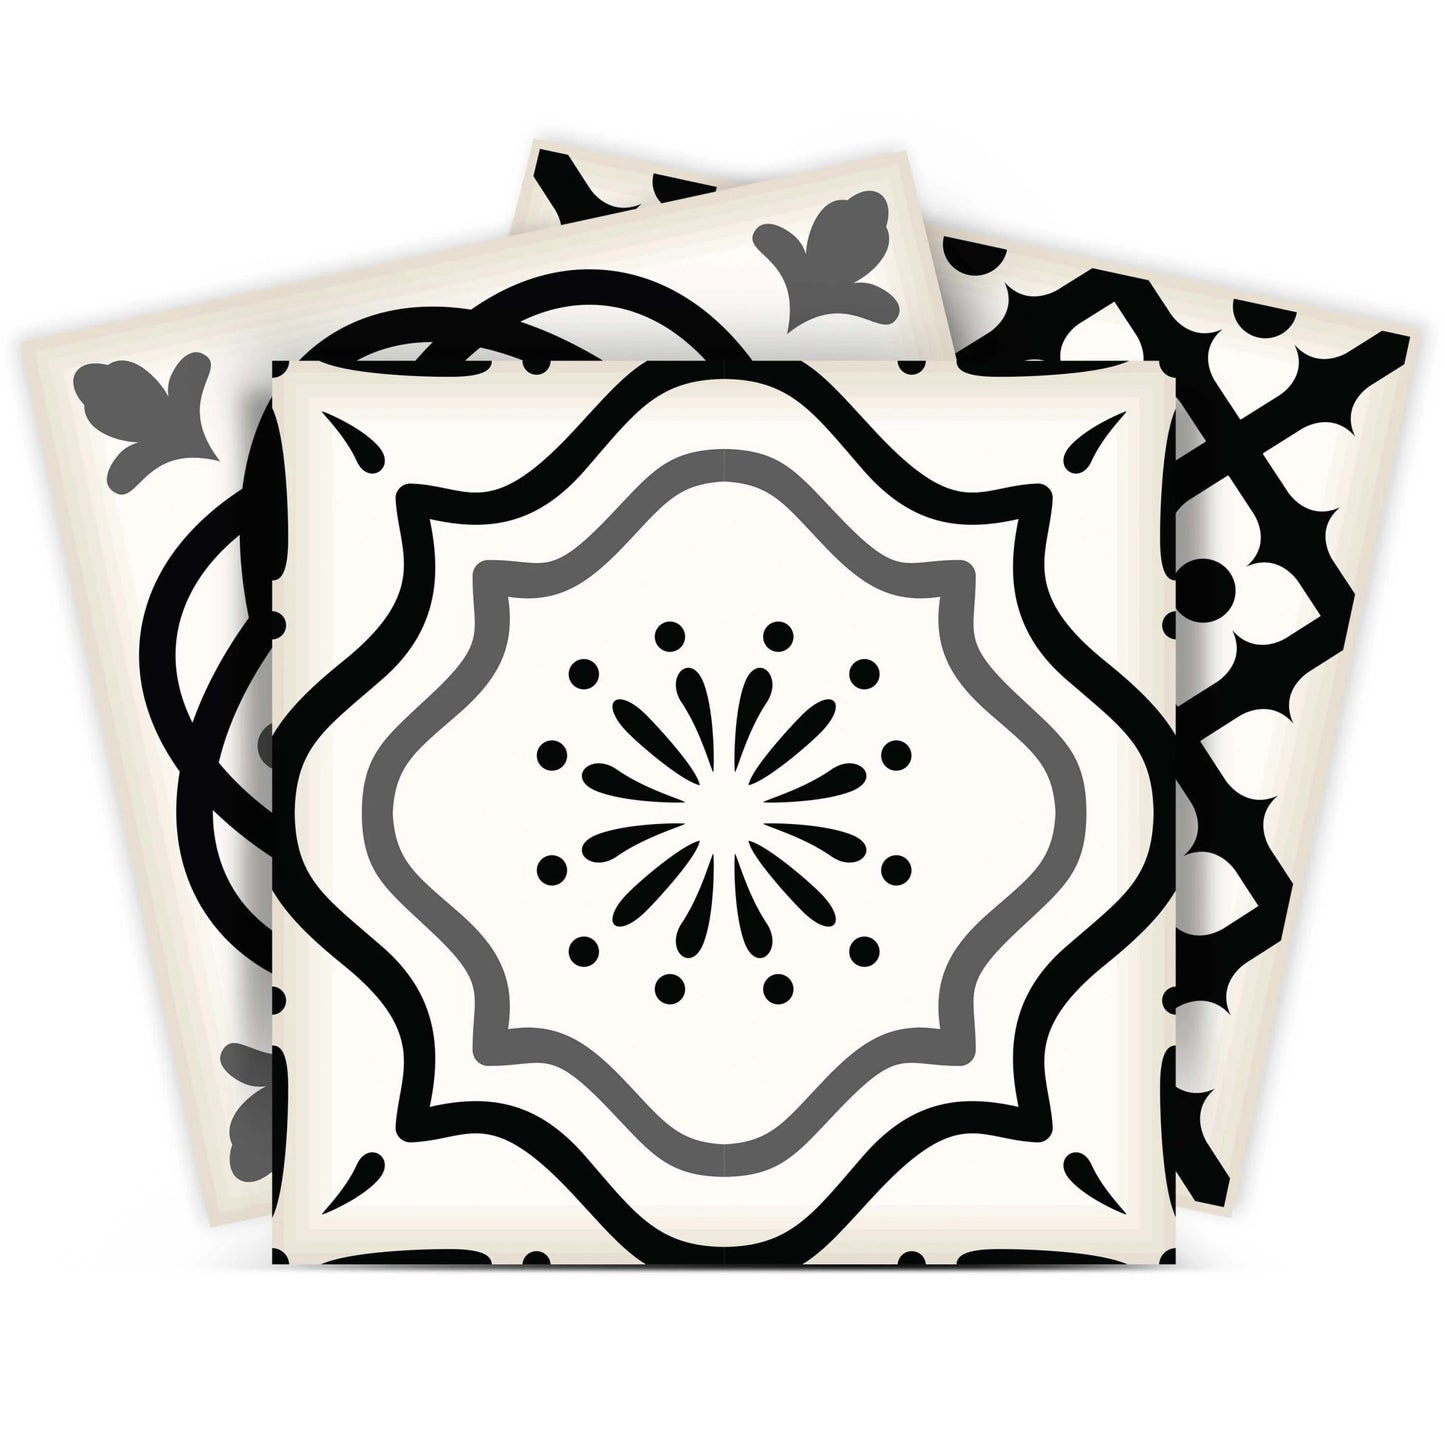 4" X 4" Black and White Multi Peel and Stick Removable Tiles